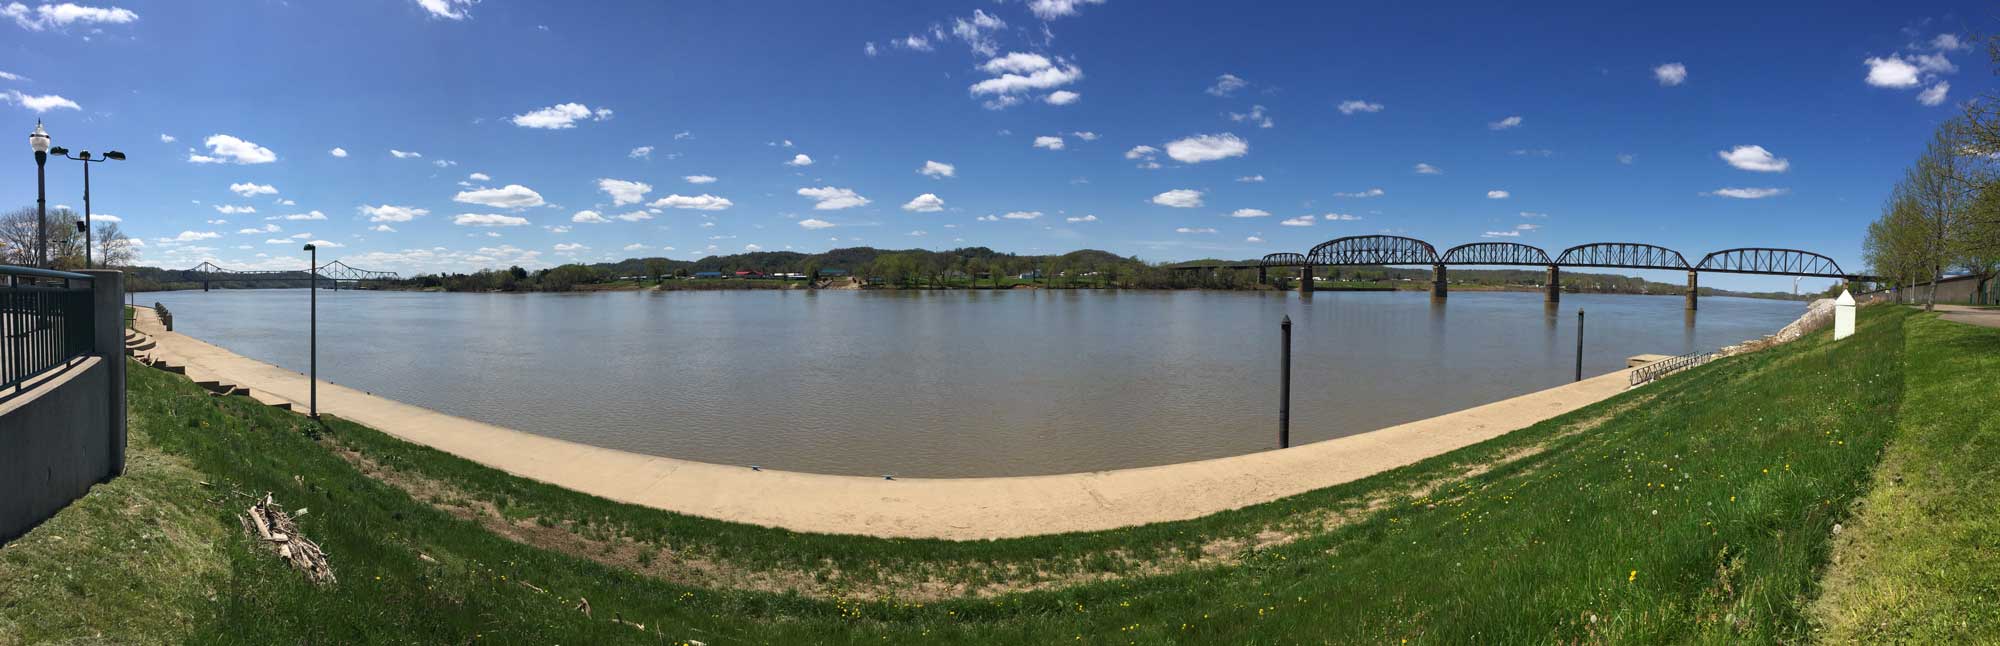 Photograph of the Ohio River as viewed from Point Pleasant, West Virginia.